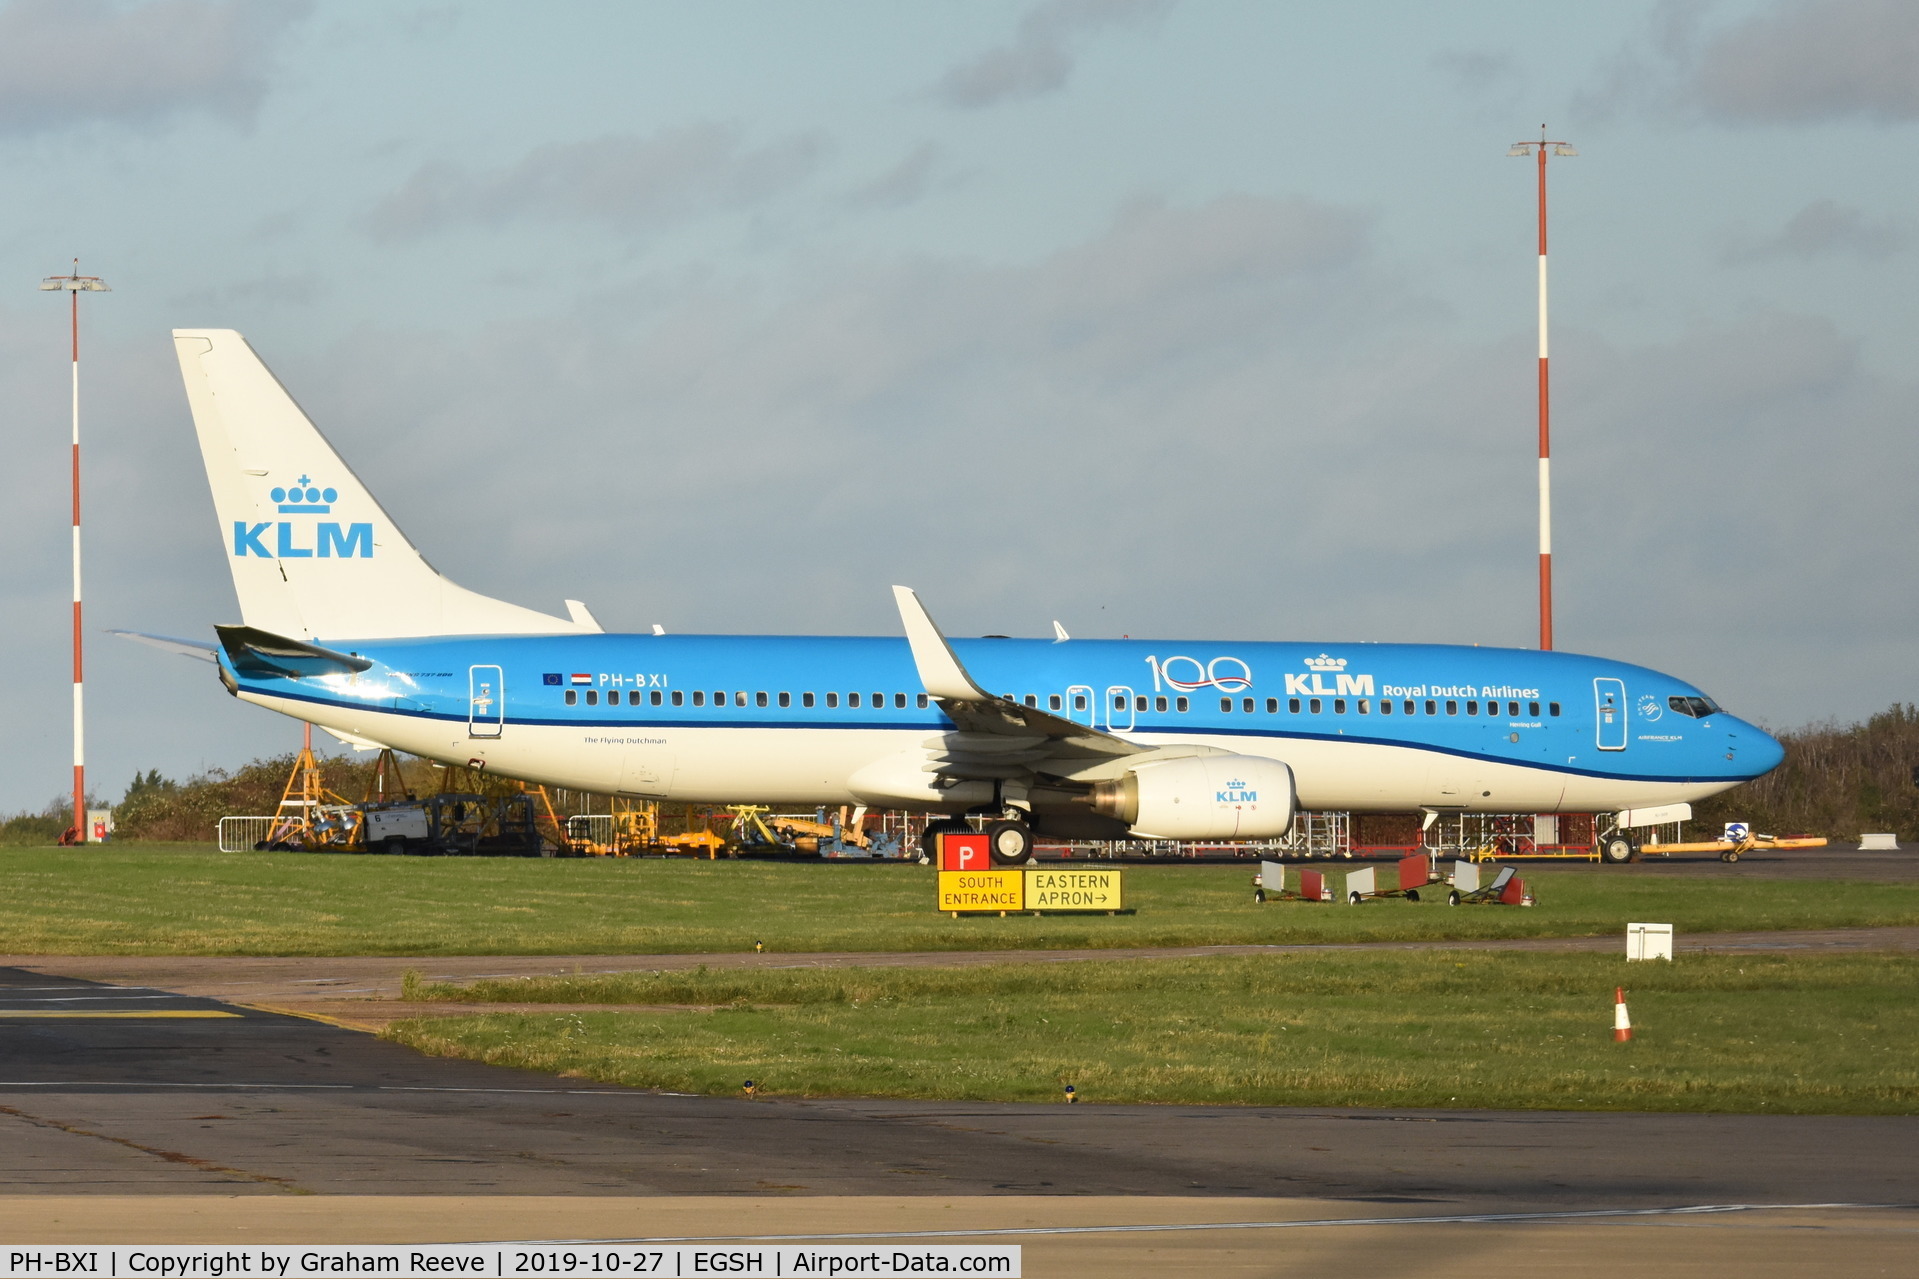 PH-BXI, 2000 Boeing 737-8K2 C/N 30358, Parked at Norwich.